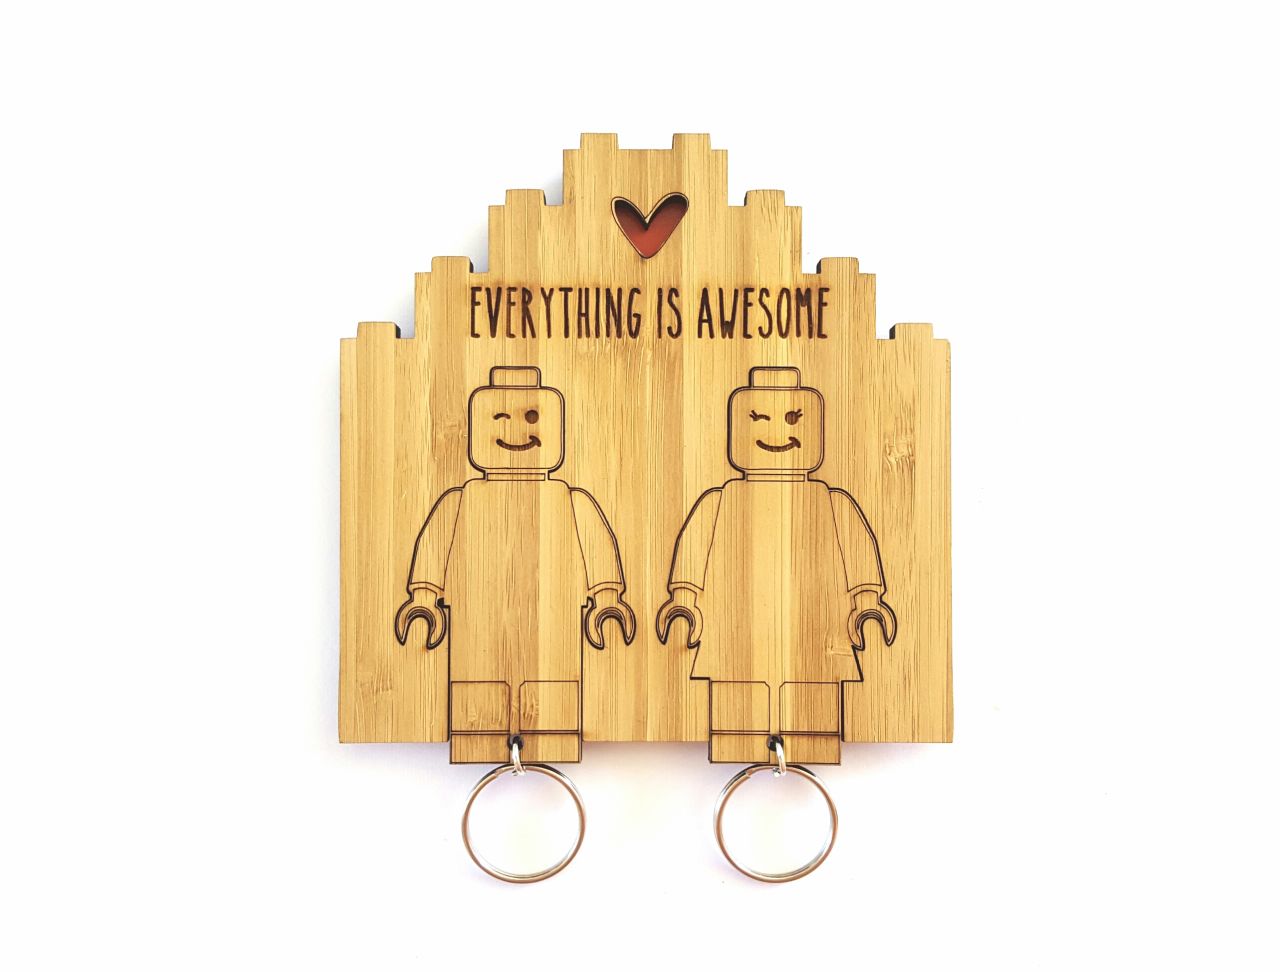 "These keyring sets have been flying off the shelves," adds Marx, of laser-cut decor store Hallo Jane.